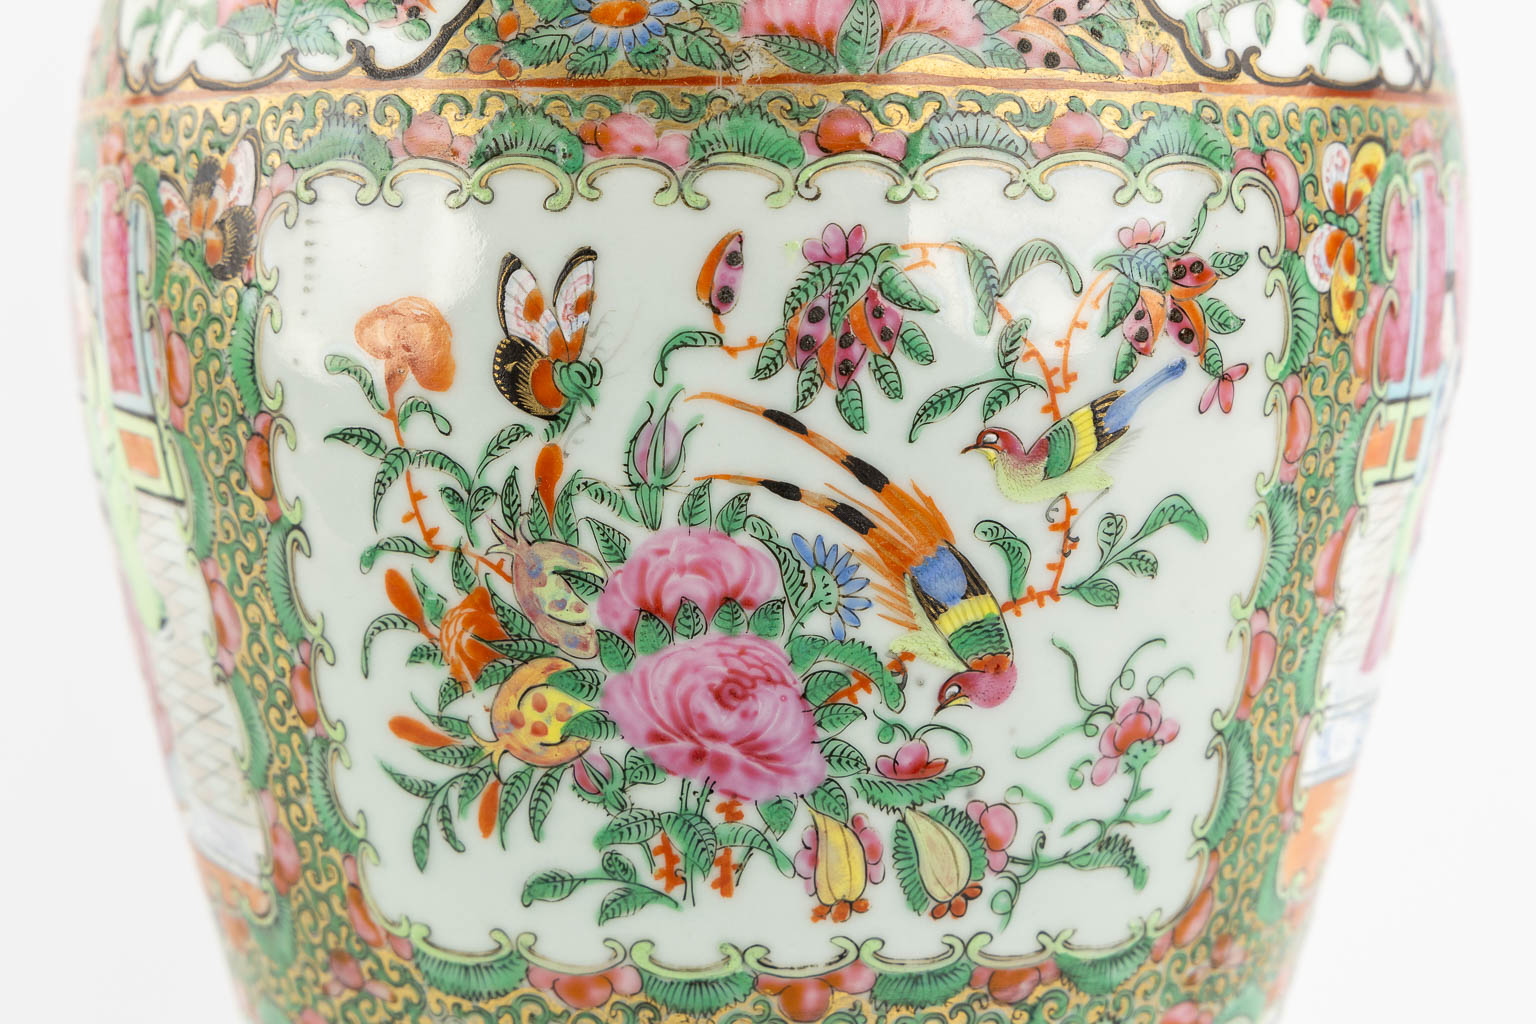 A Chinese Canton vase with a lid, interior scnes with figurines, fauna and flora. 19th/20th C. (H:4 - Image 17 of 19